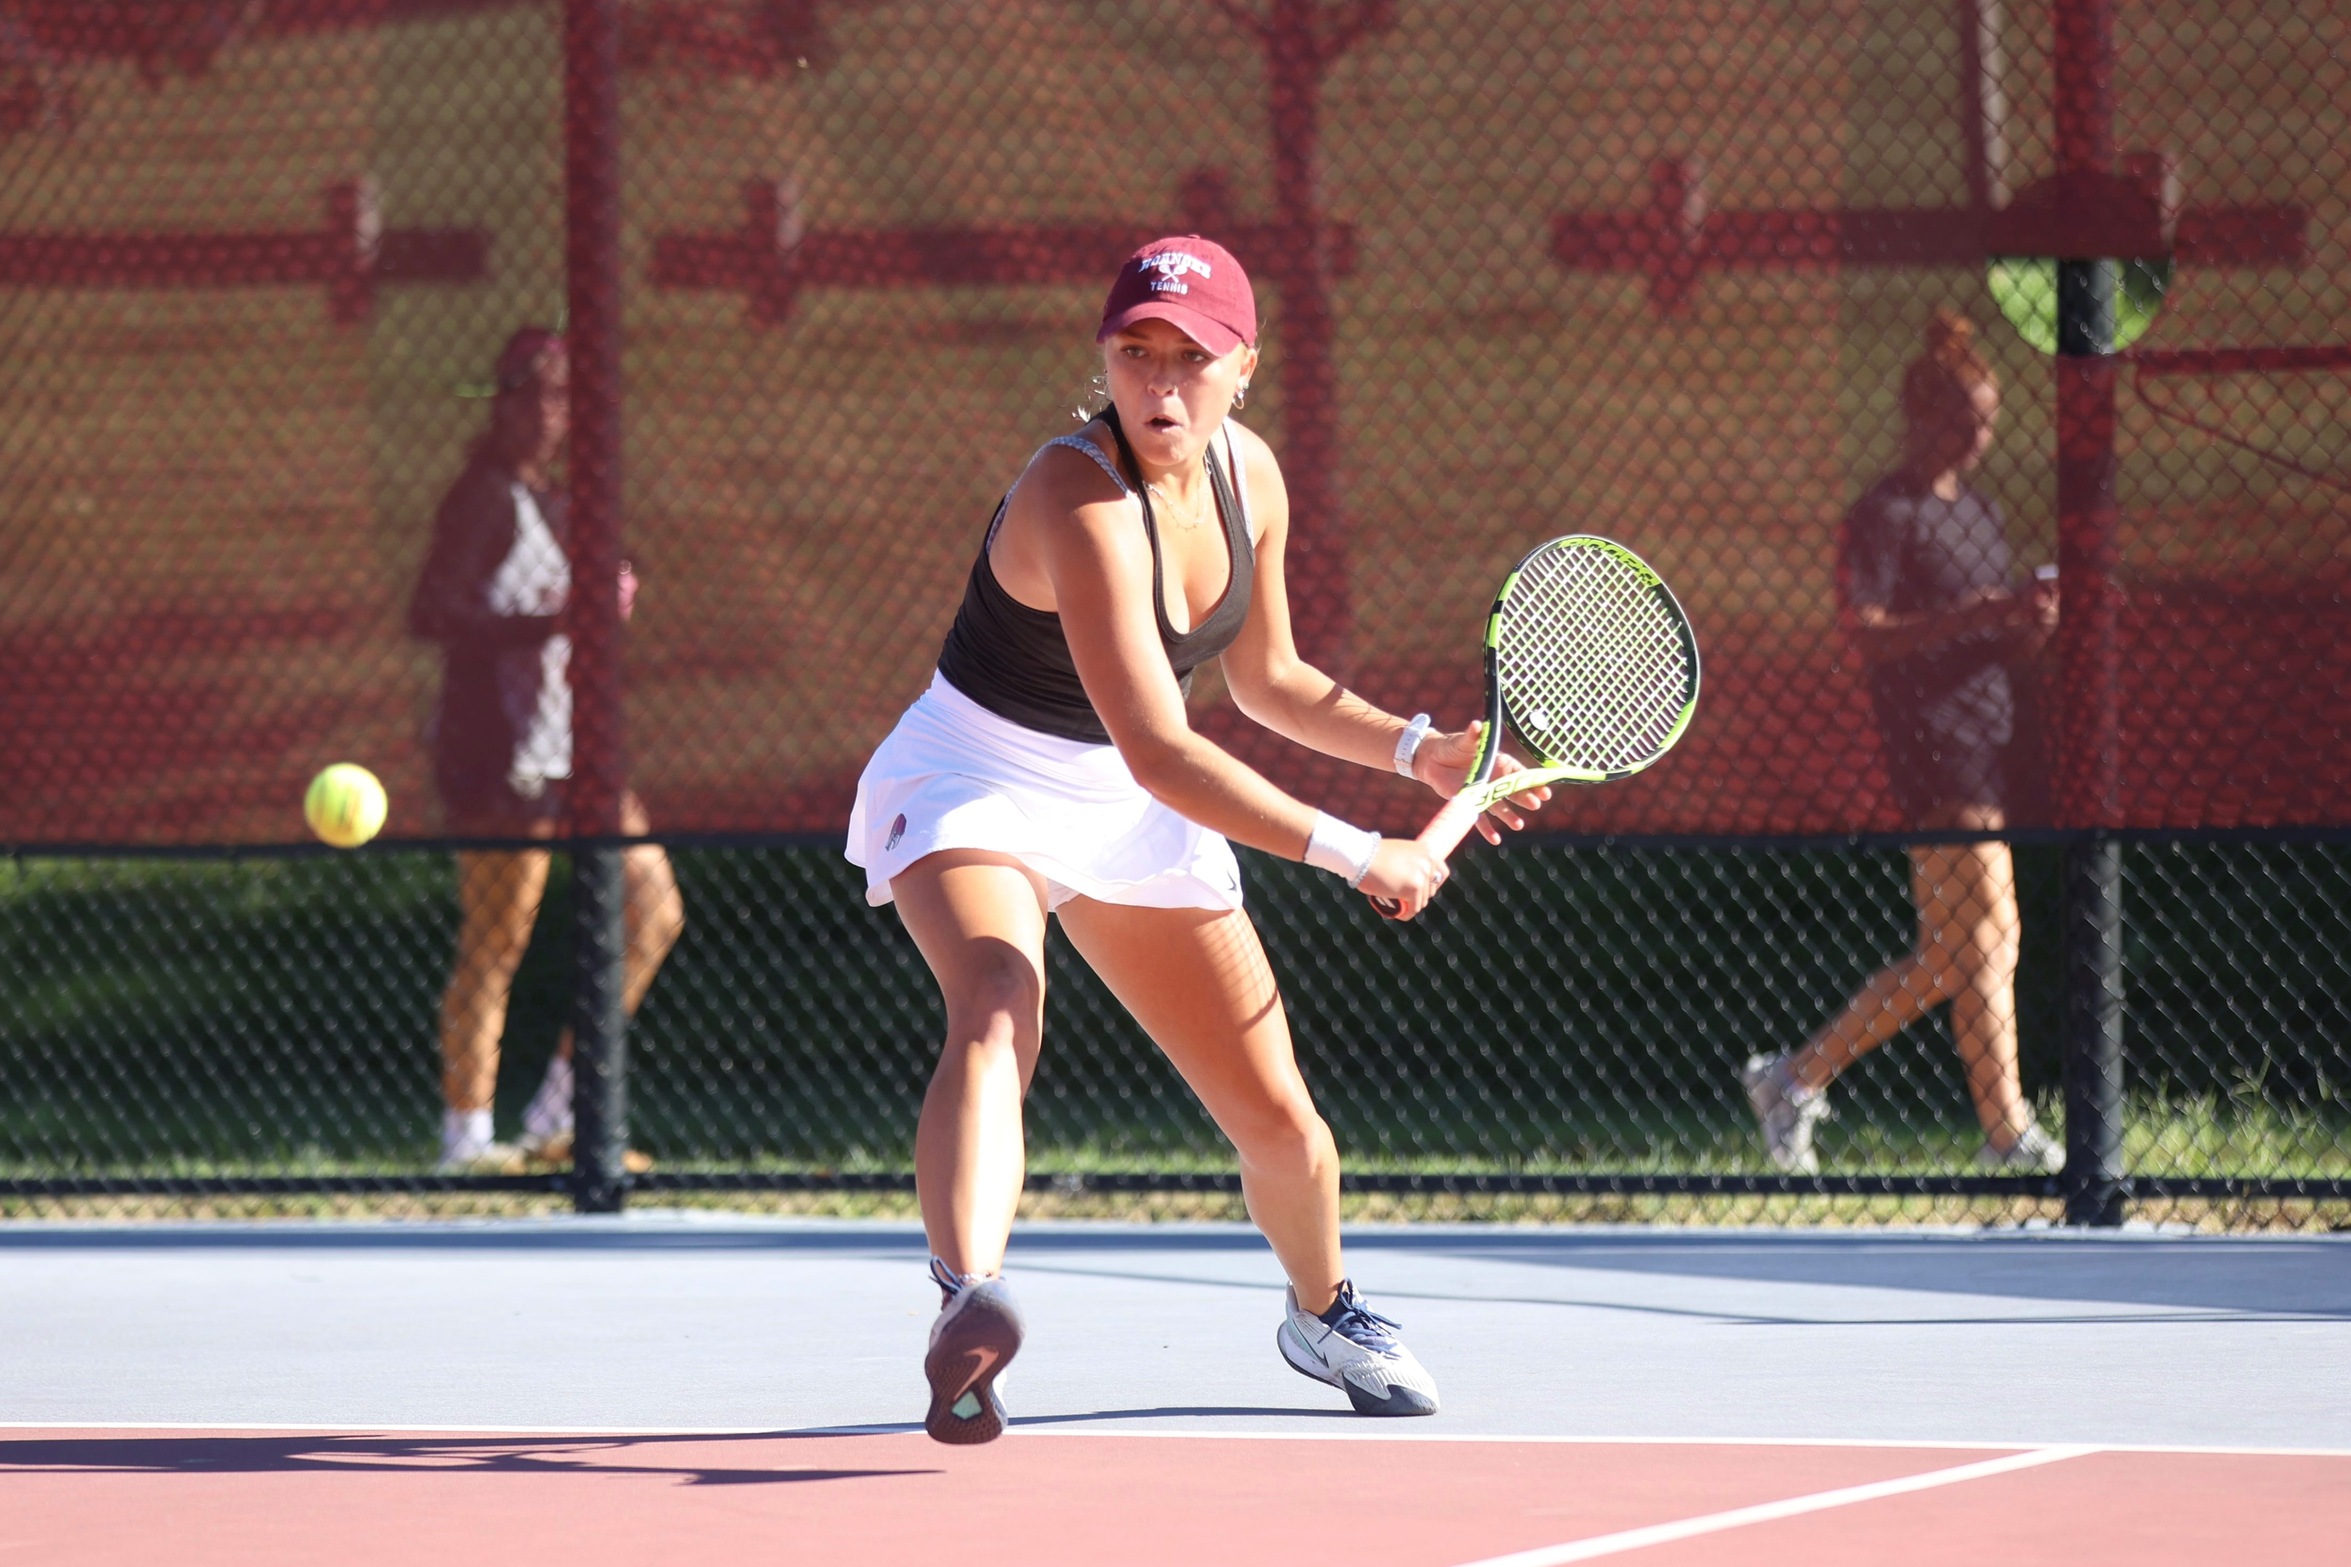 action photo of RC women's tennis player hitting a backhand